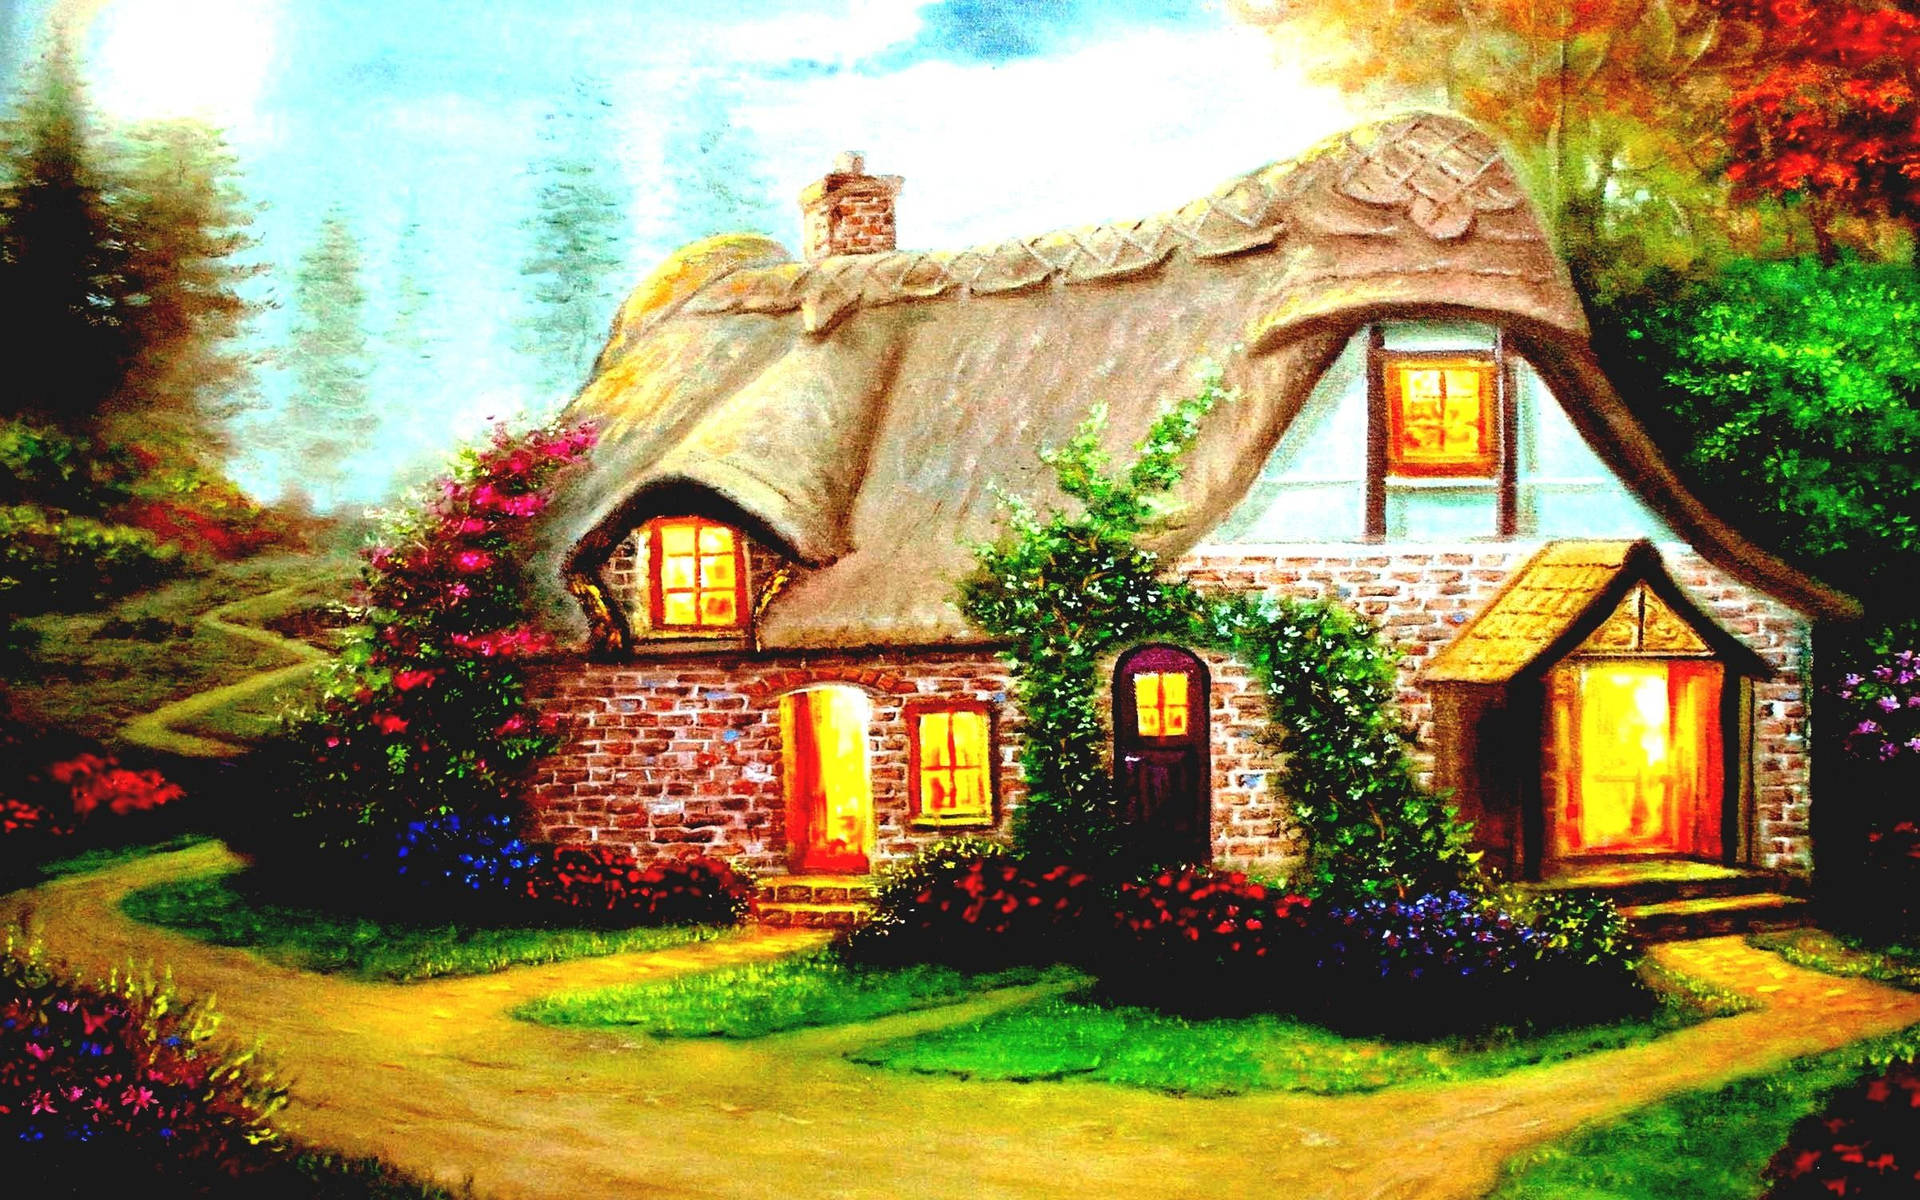 Take In The Glowing Beauty Of This Charming Cabin House Background